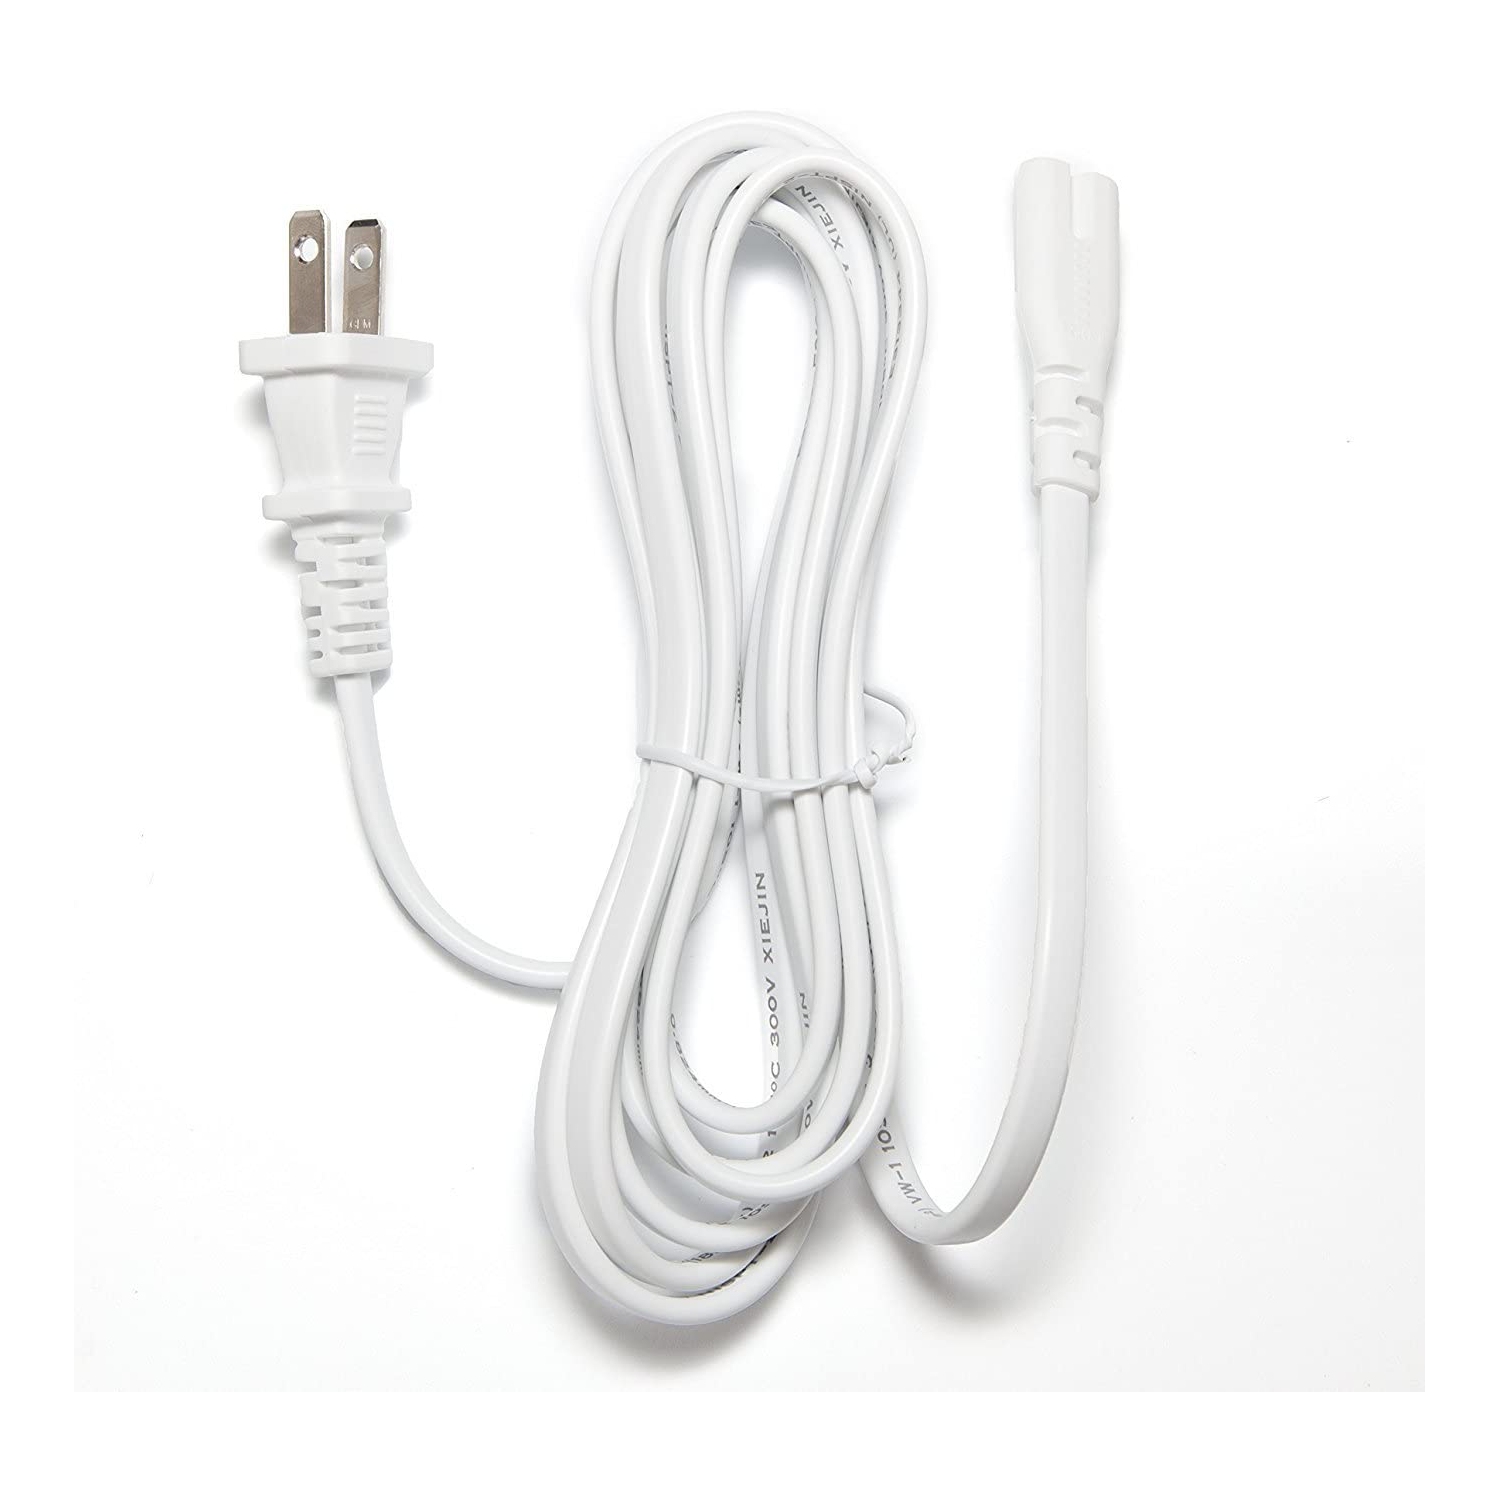 [UL Listed] (White) 1.5 Meter AC Power Cord Compatible with HP DeskJet 3755